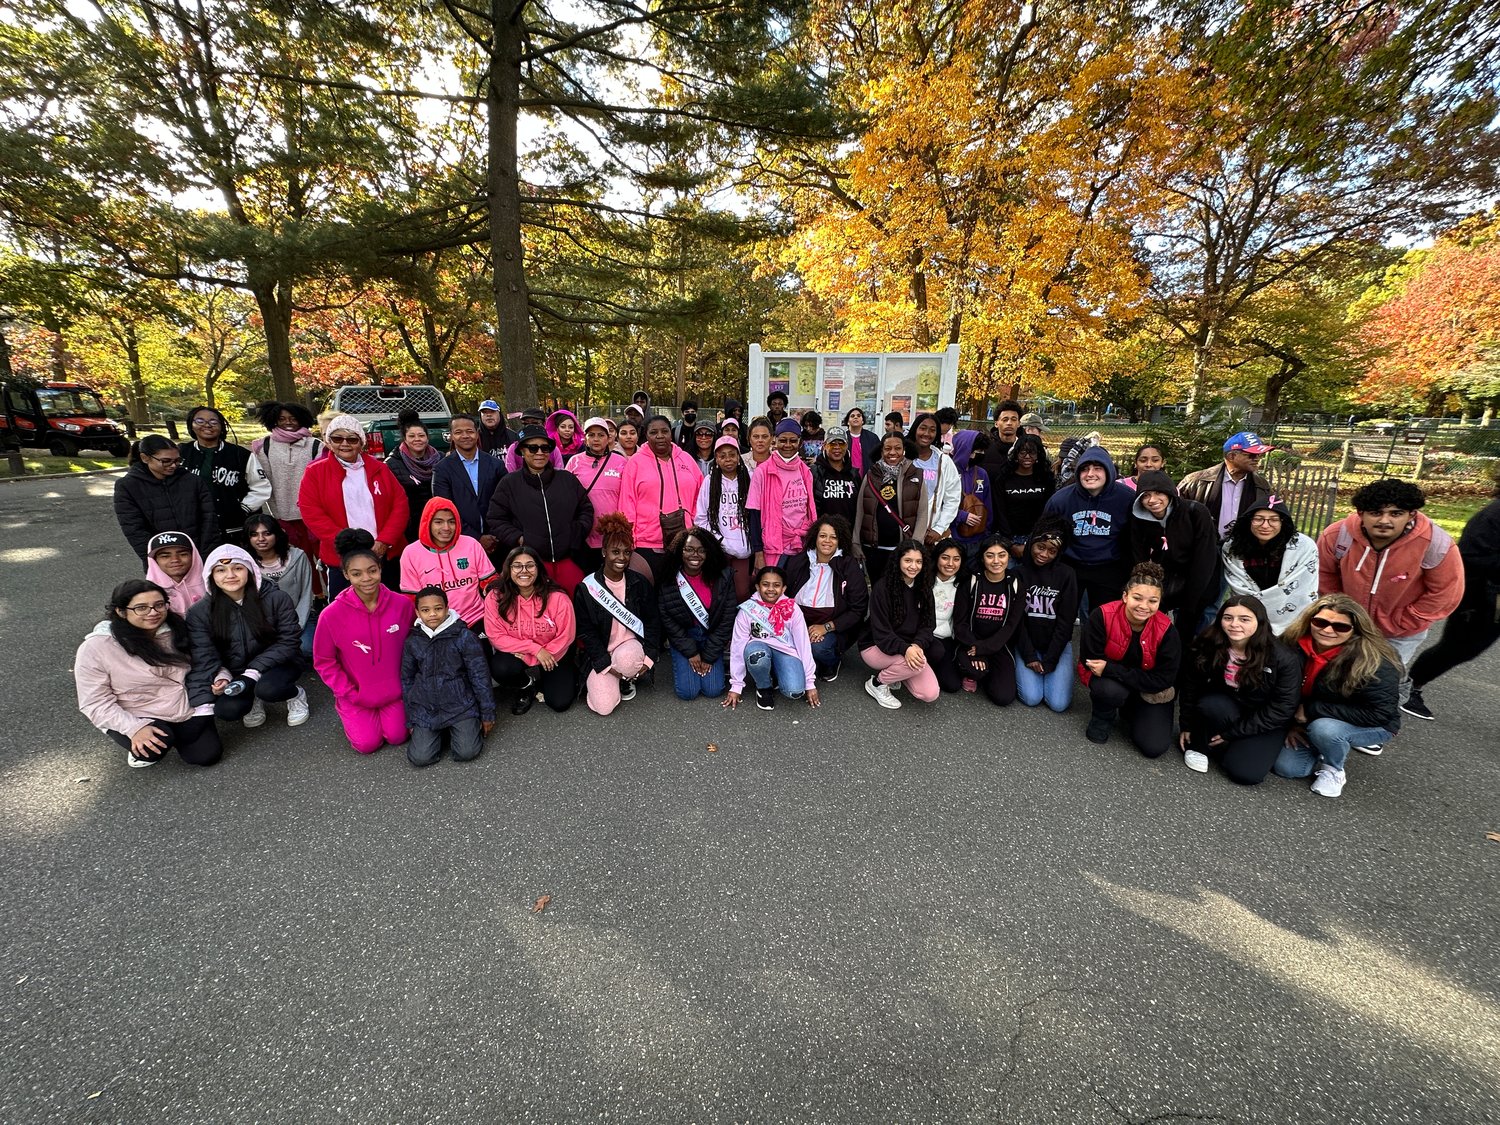 Dozens of participants showed up for the inaugural Dr. Elsy Mecklembourg-Guibert Breast Cancer Walk and dressed in pink for the cause.